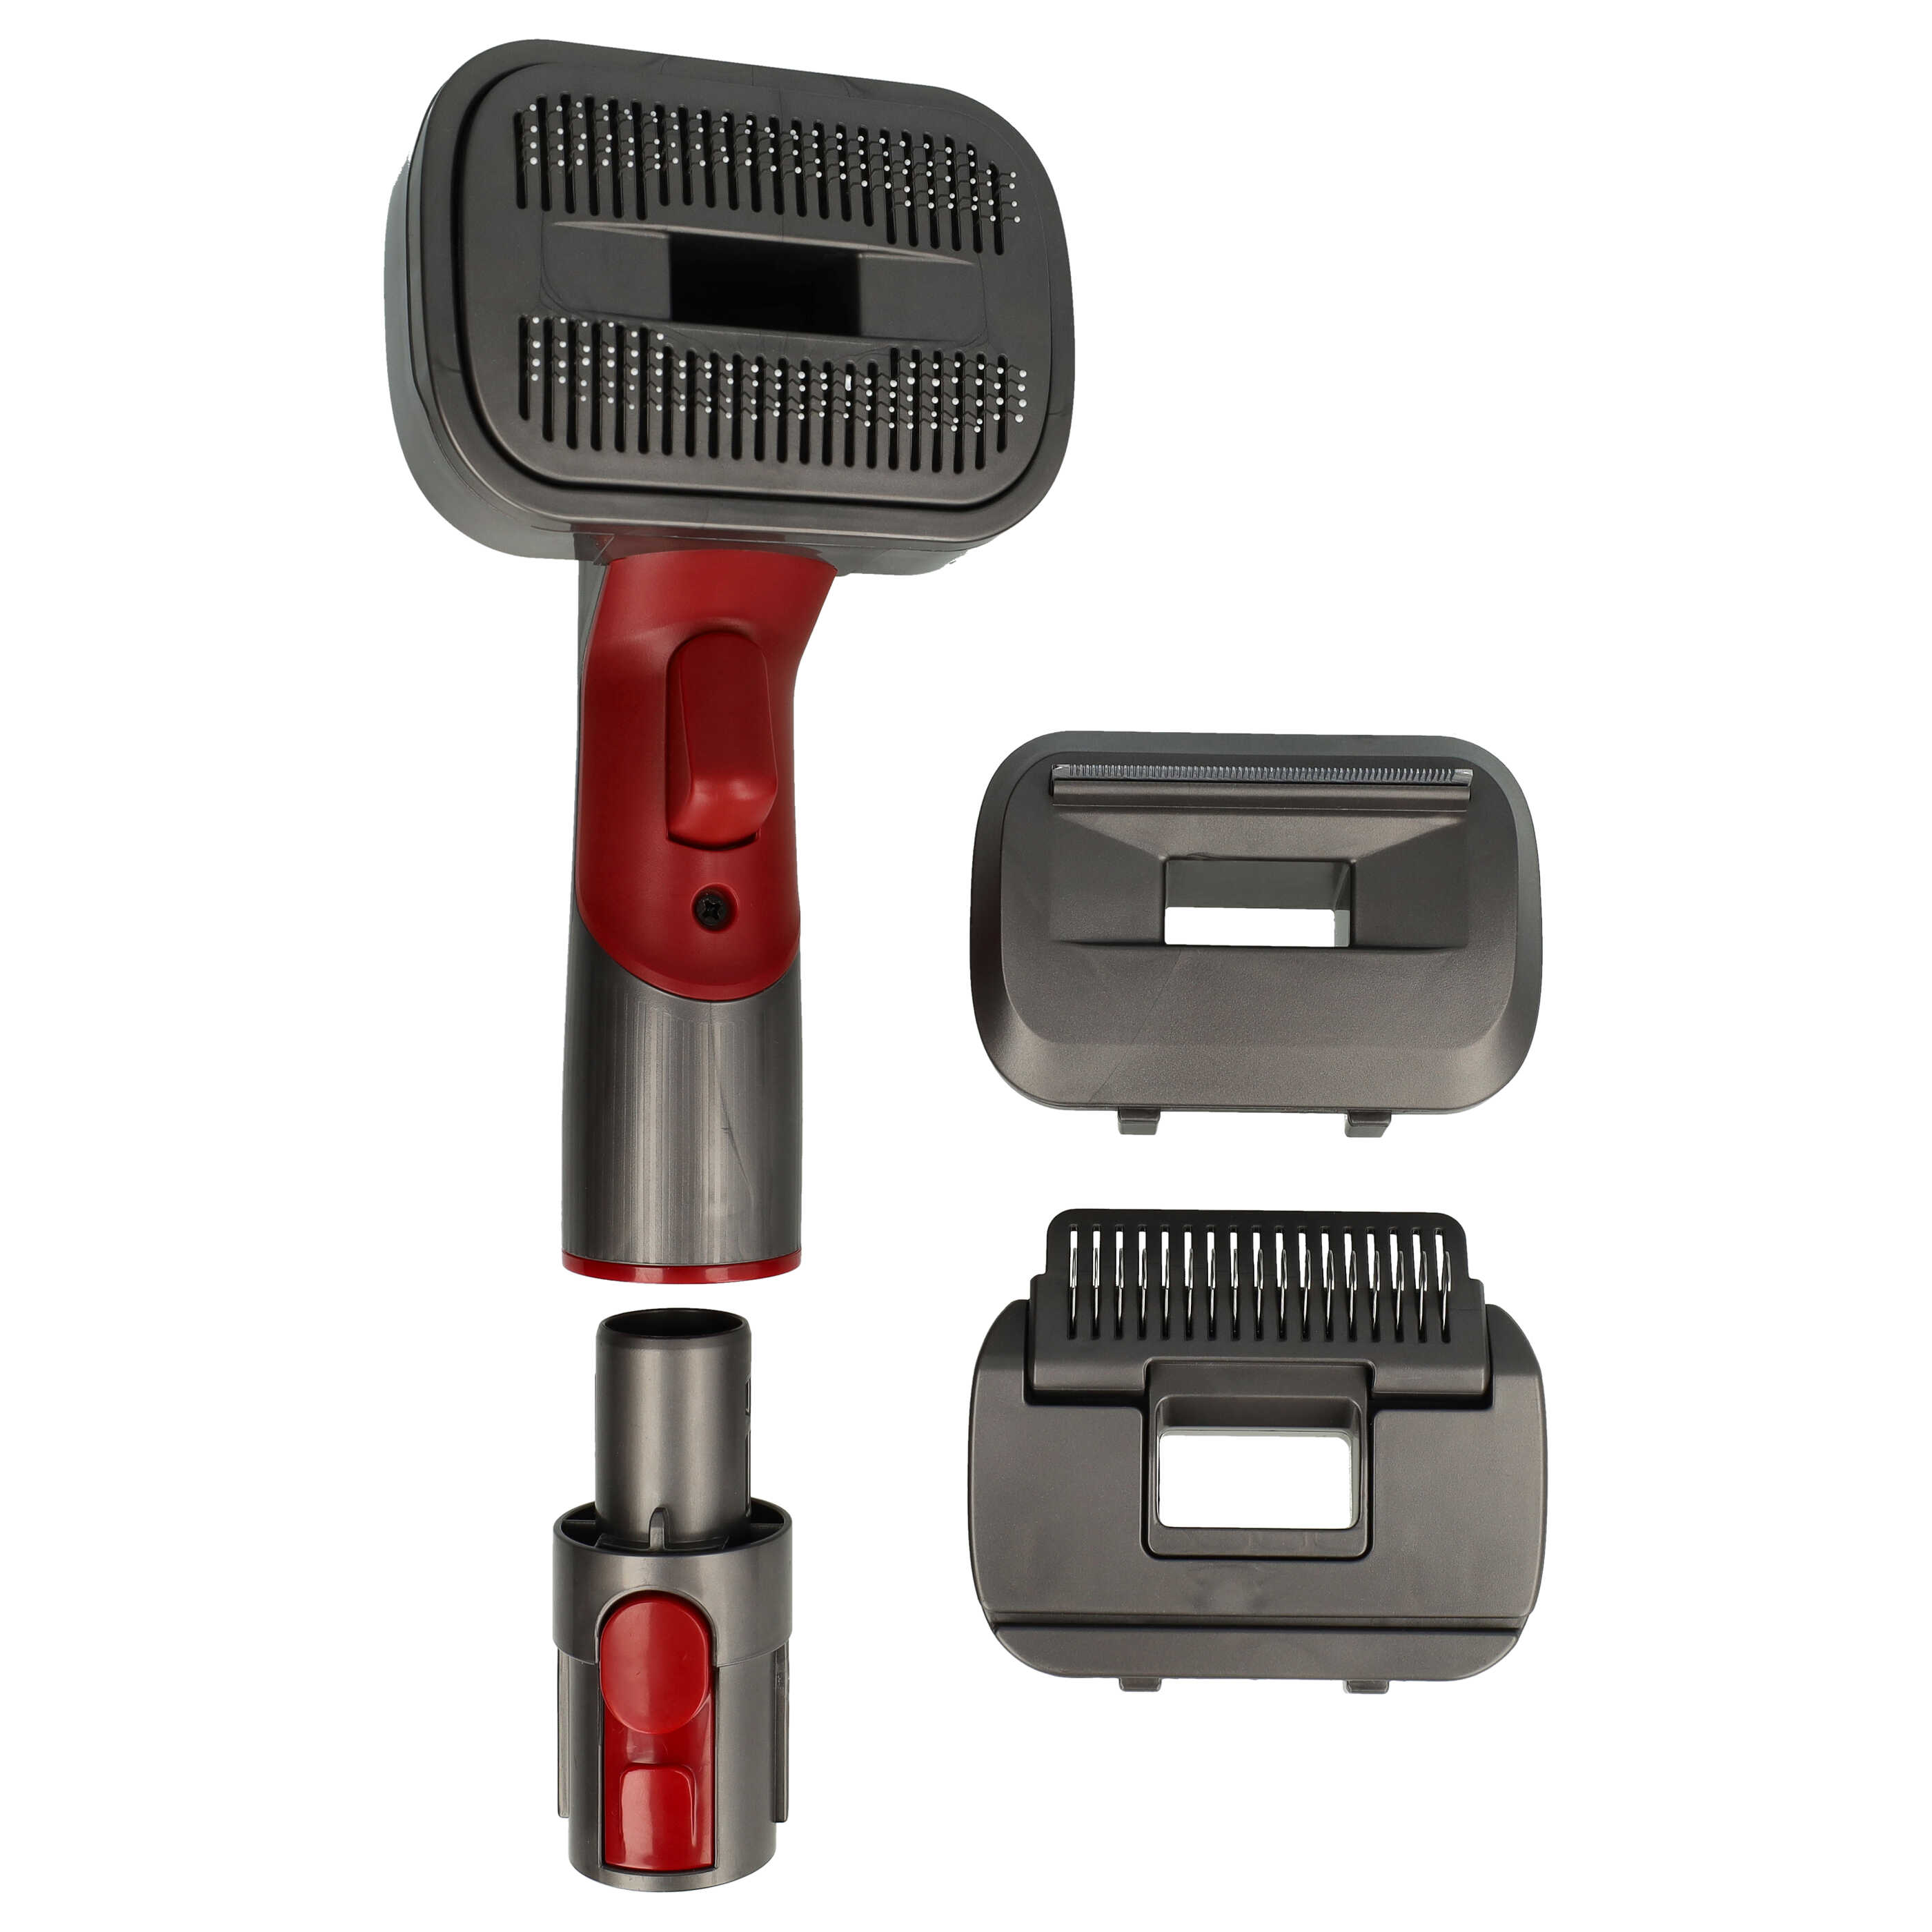 3-in-1 Pet Hair Brush Nozzle for V8 Absolute Dyson Vacuum Cleaner - Self-Cleaning, Incl. Connection Adapter